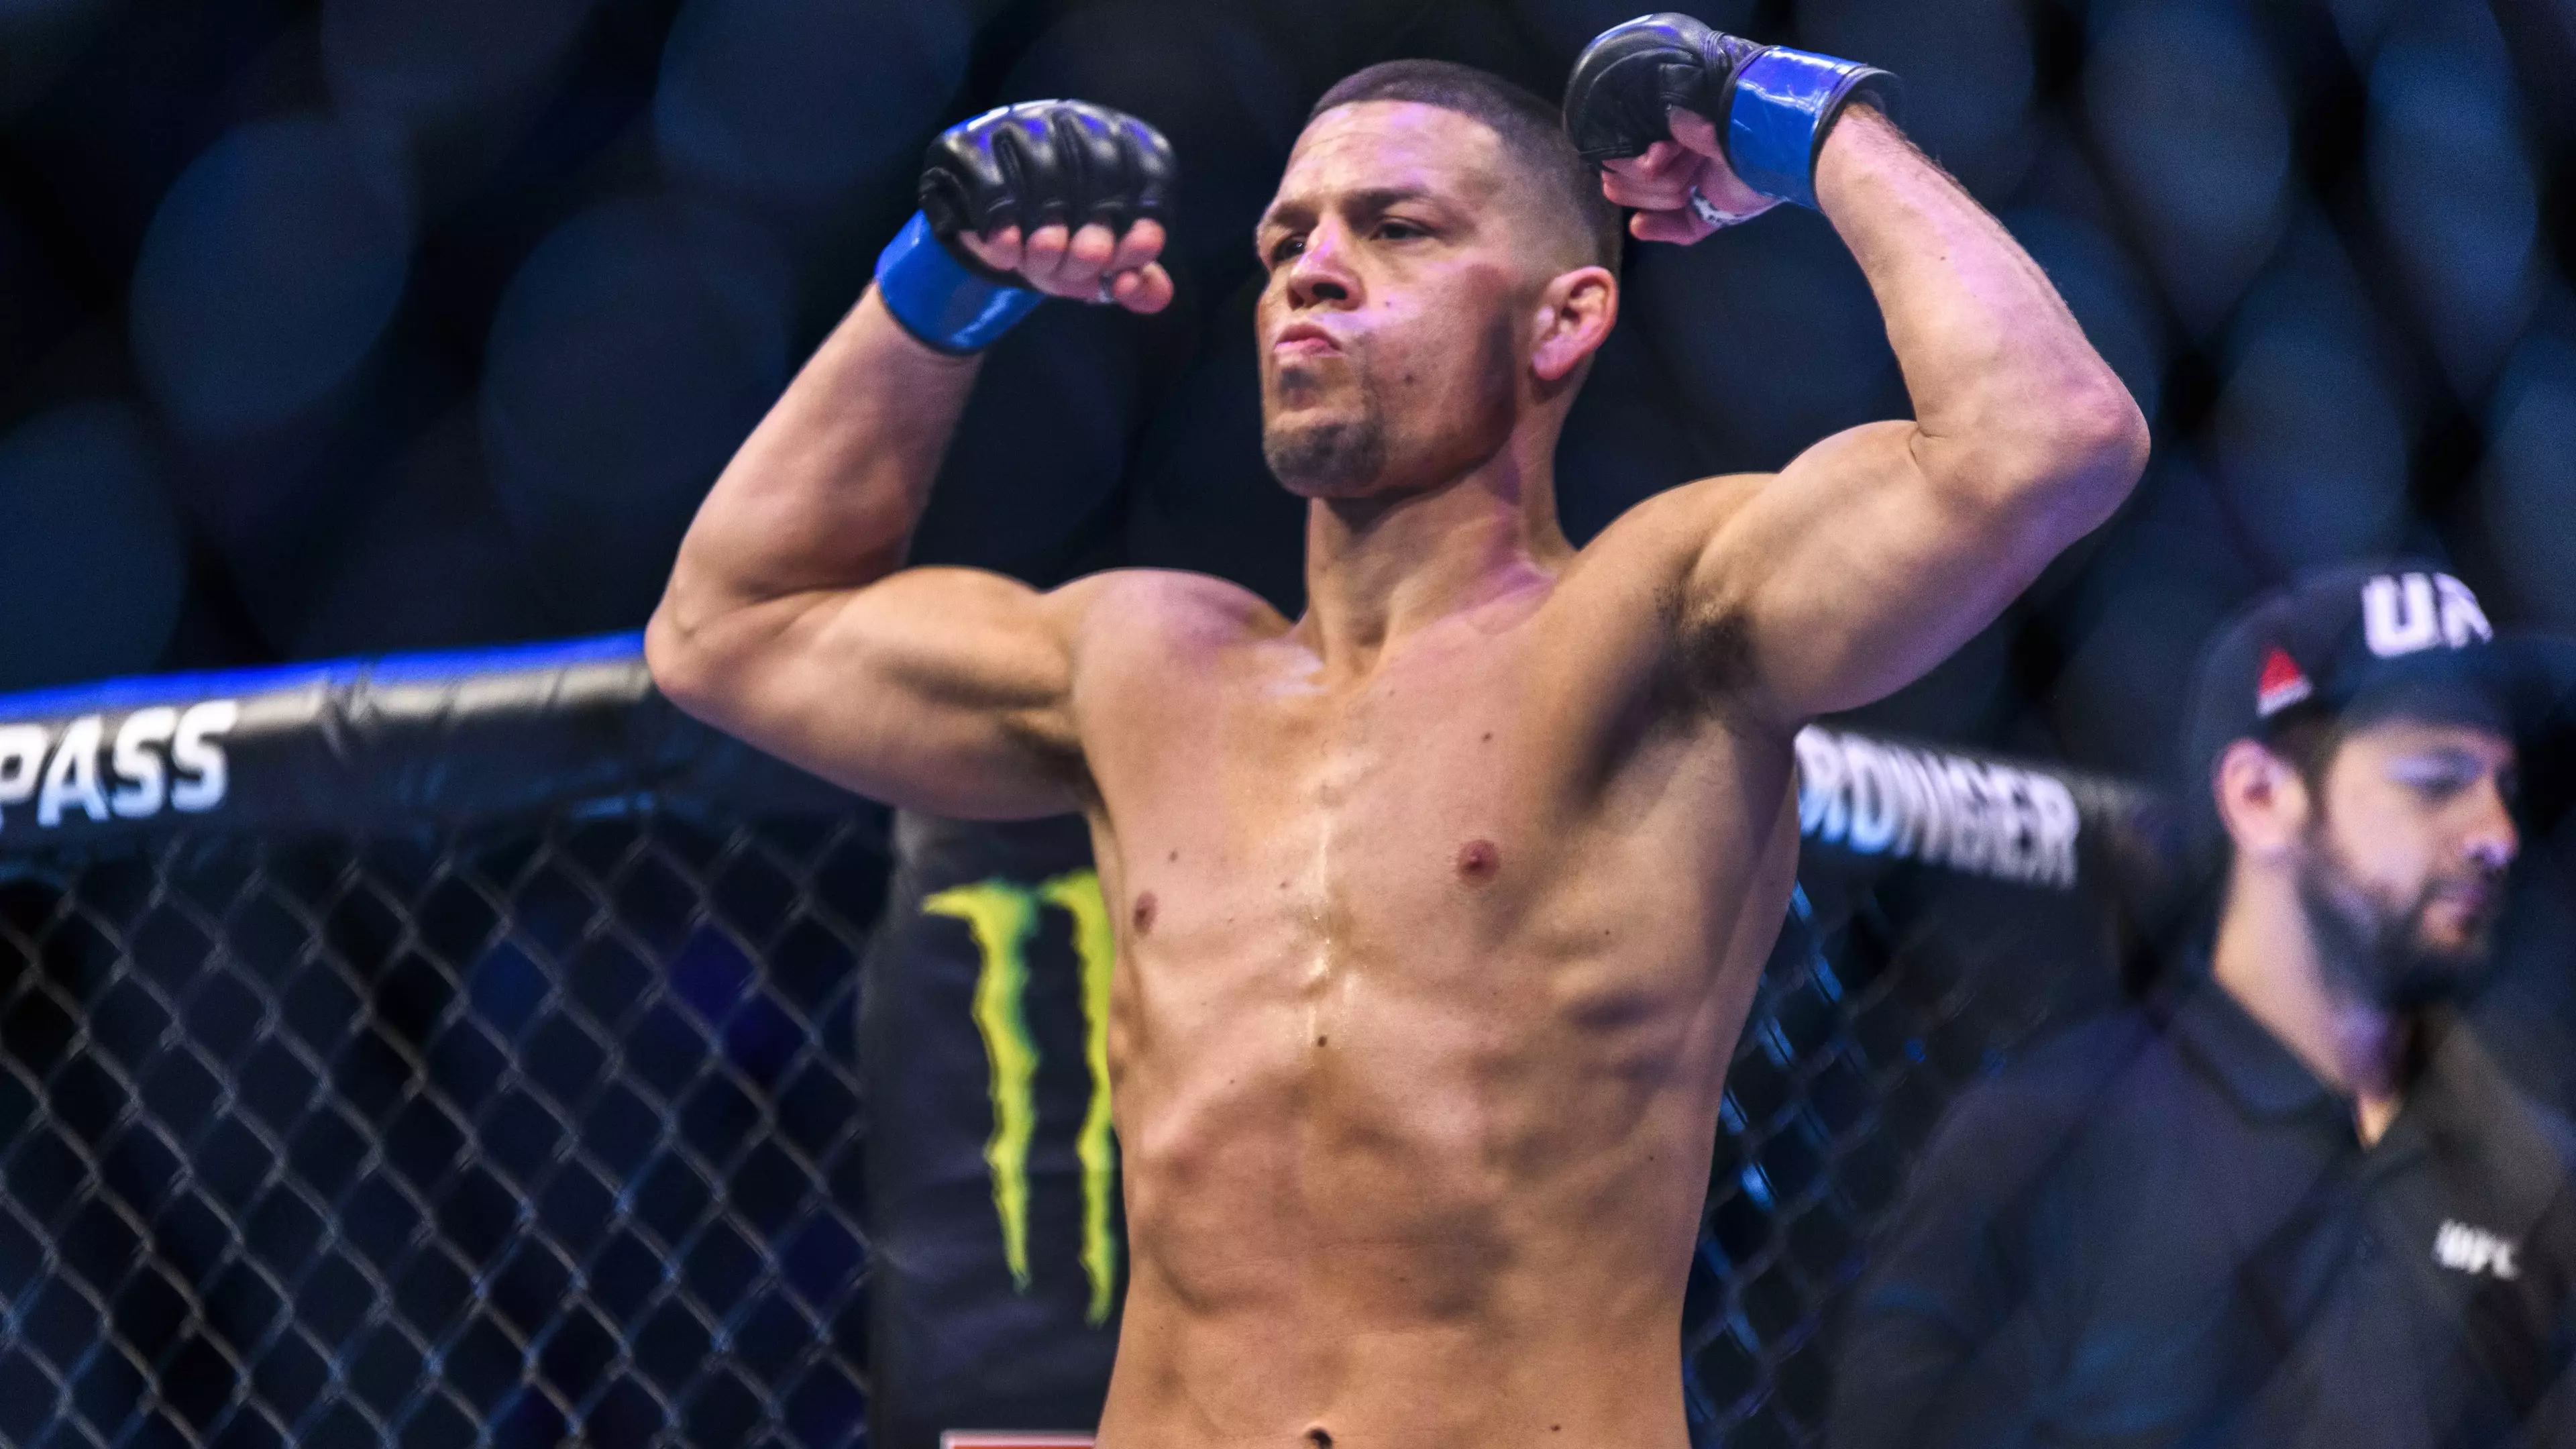 Nate Diaz Won't Compete At UFC 244 Next Week Over 'Tainted Supplements'